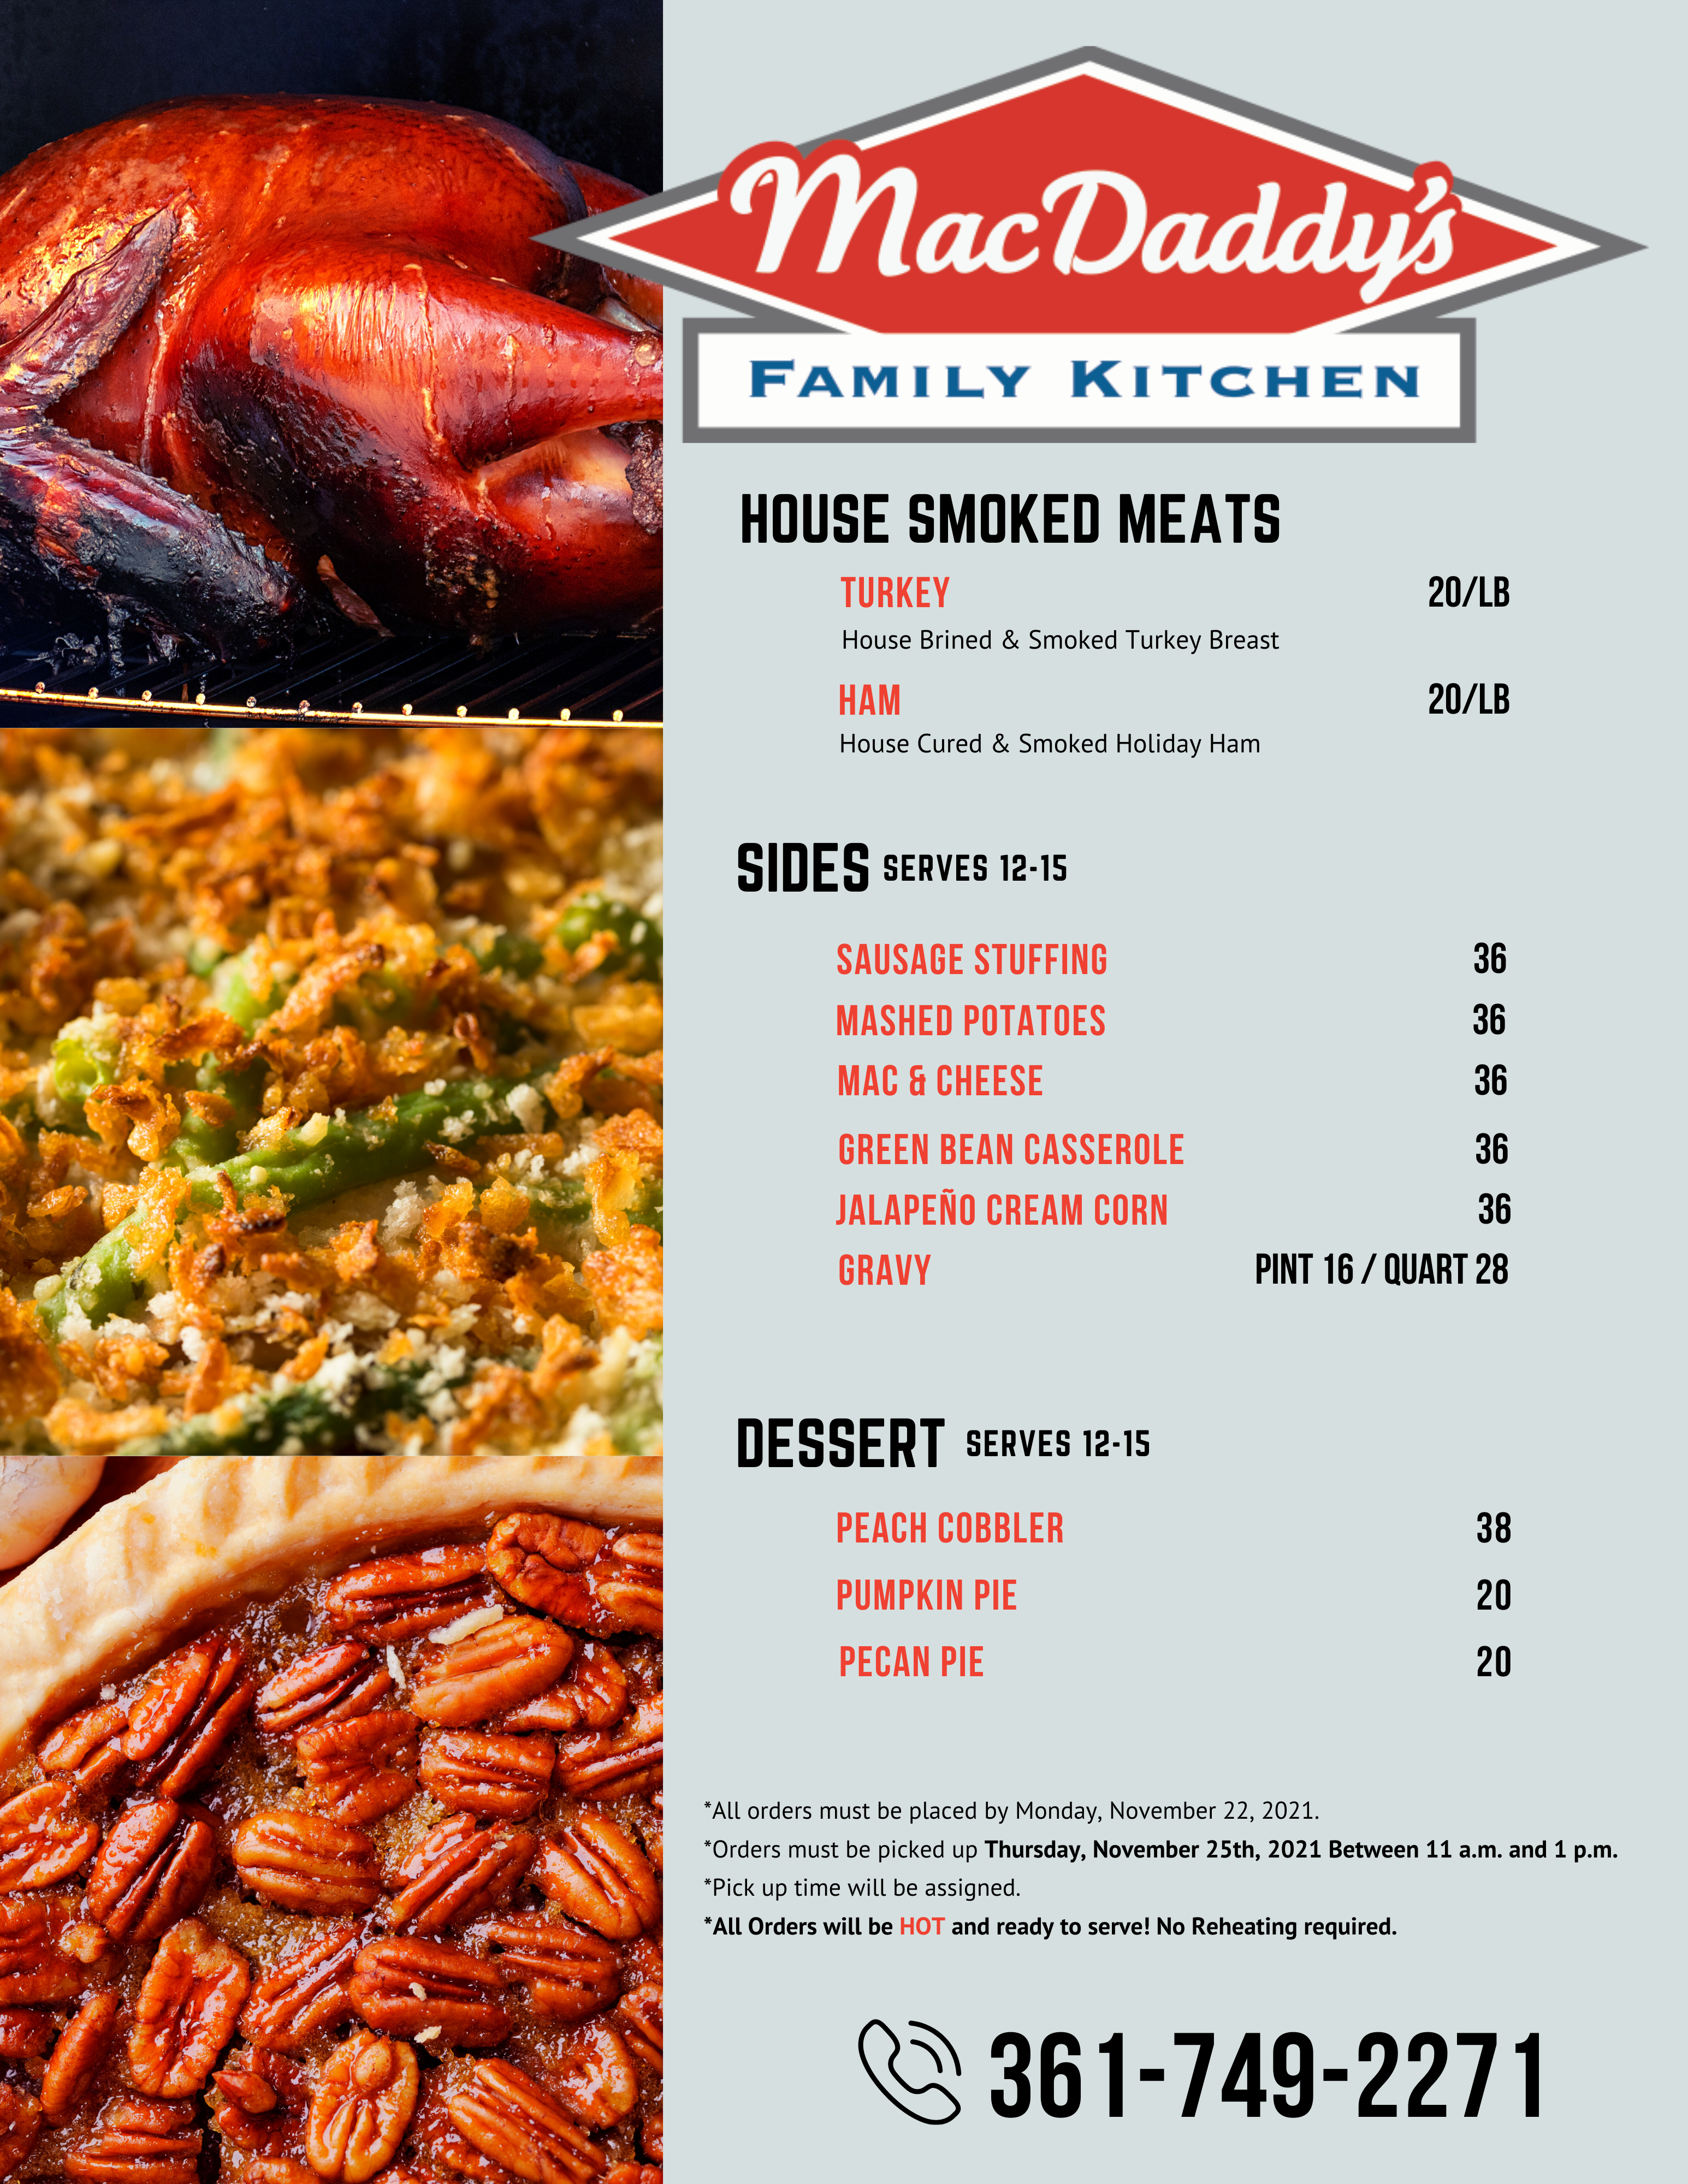 Special Holiday menu for take-out